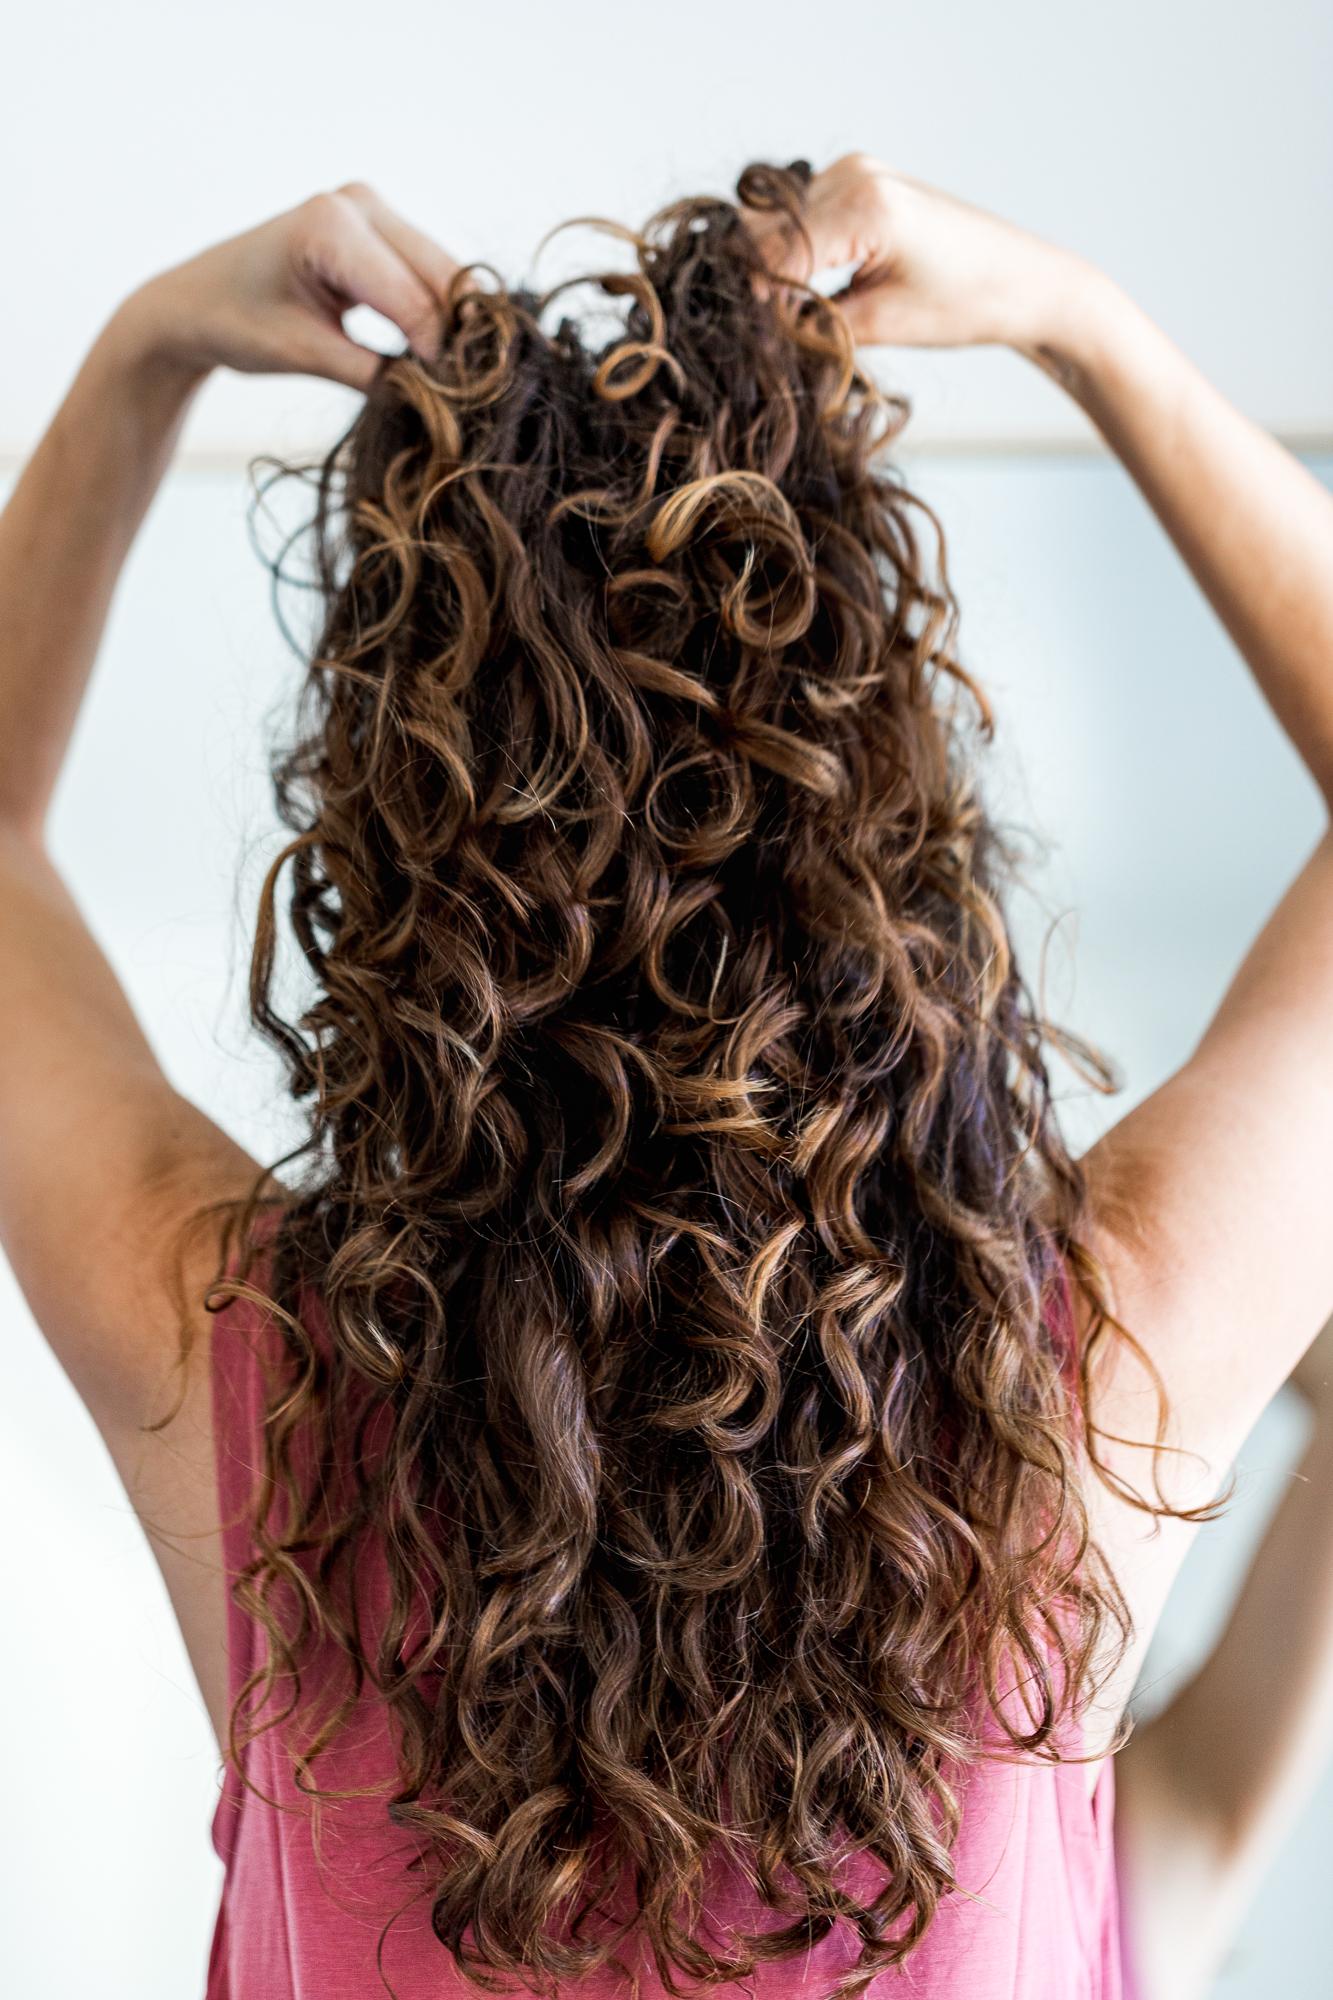 Transform Your Curls: Hair Care Routine for Curly Hair 13 bbf0f0ef5574492bb0db8101842ea6ef bbf0f0ef5574492bb0db8101842ea6ef